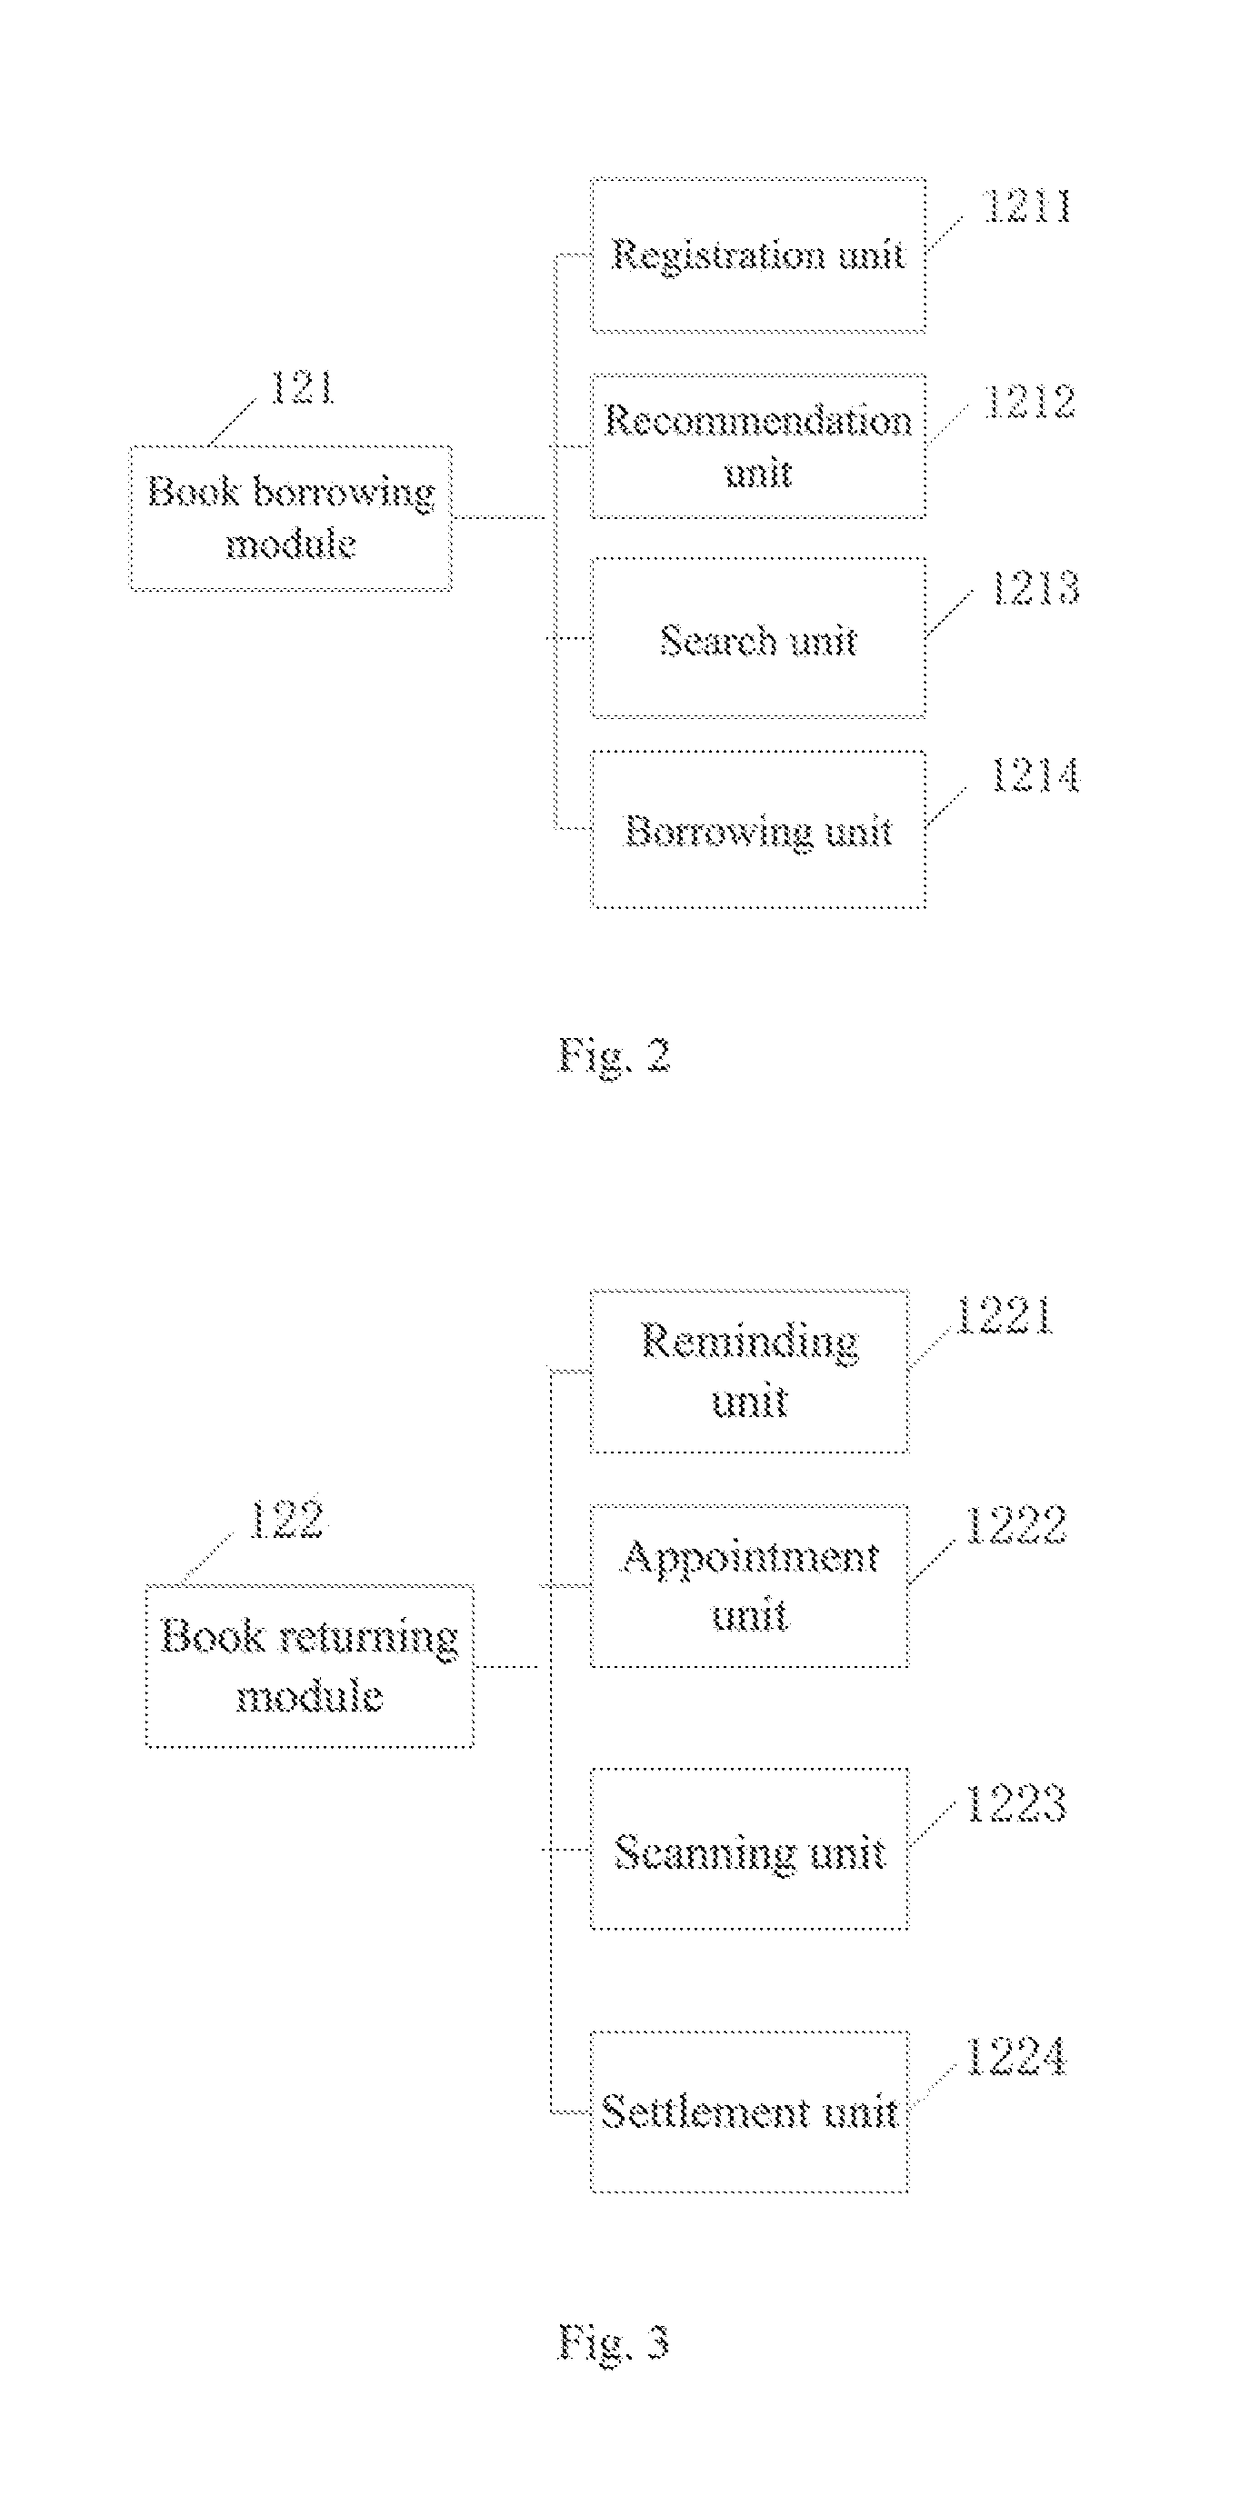 Book self-borrowing system and method